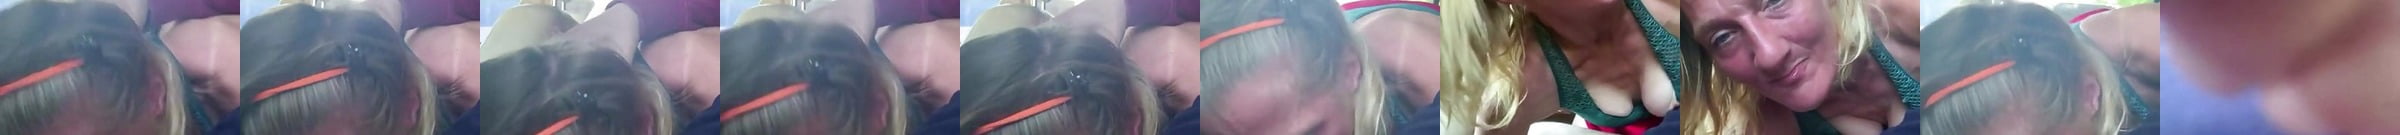 50yo Toothless Granny Gives A Blowjob HD Porn 2d XHamster XHamster